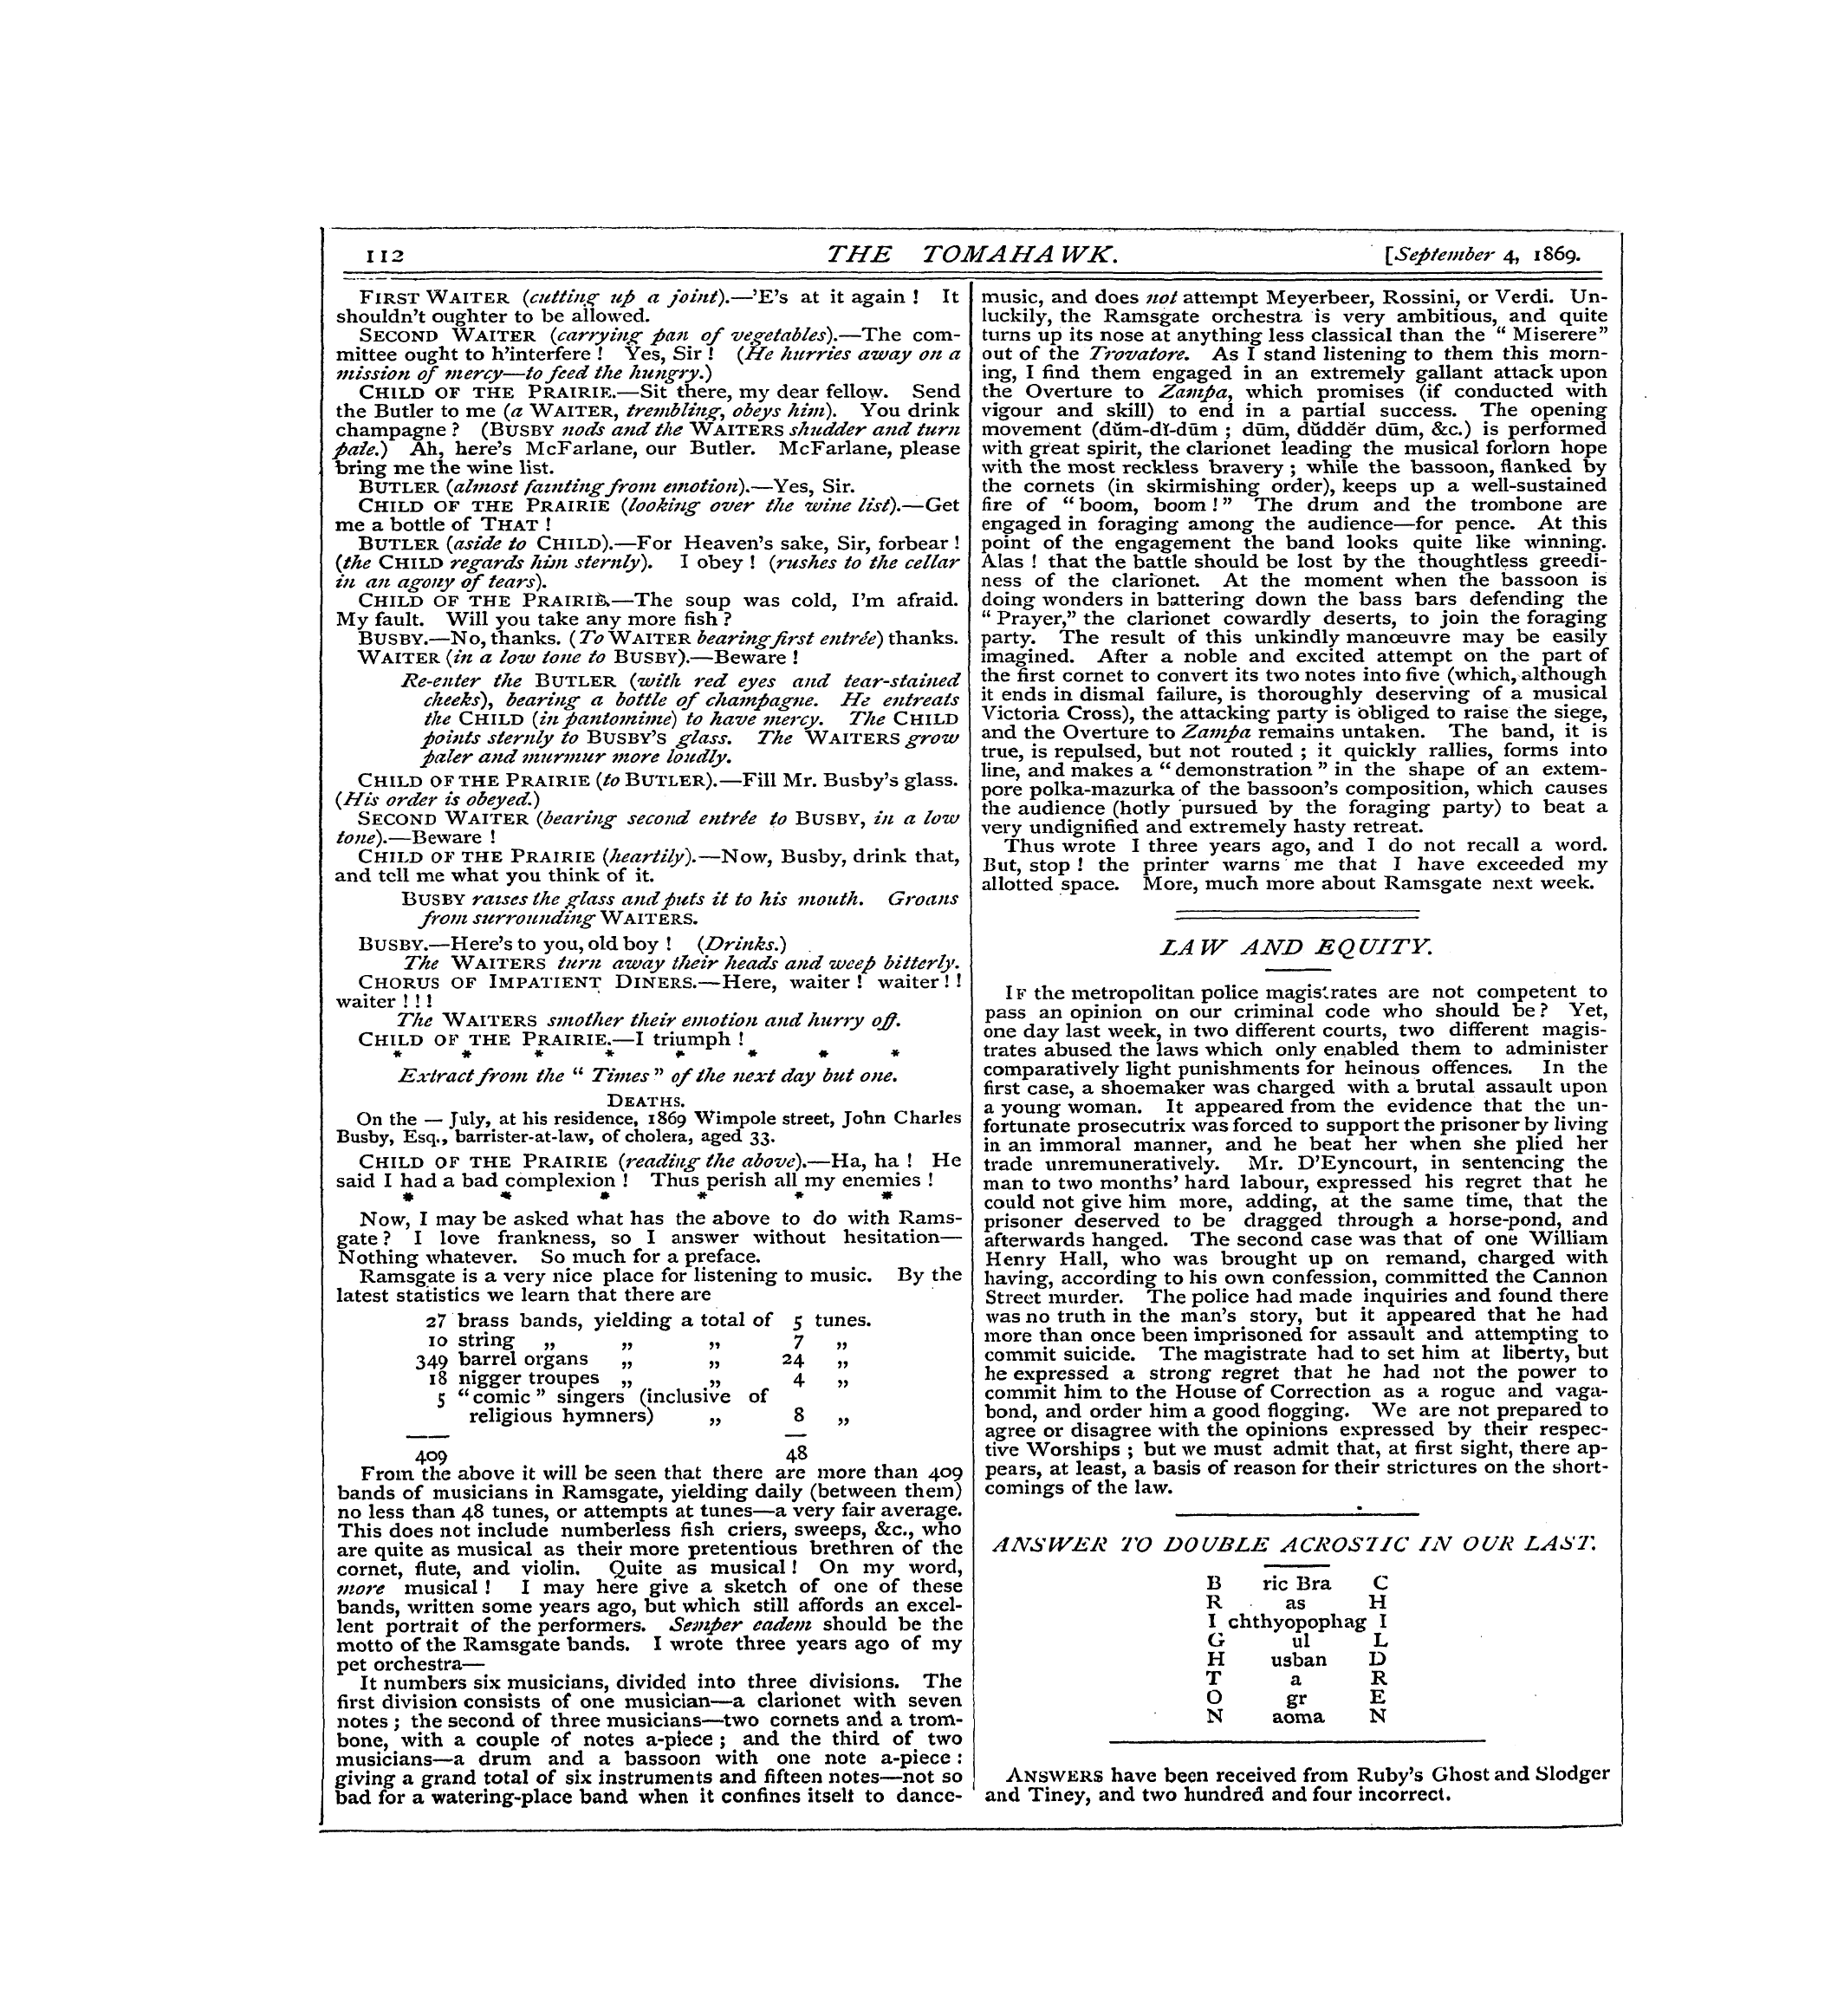 Tomahawk (1867-1870): jS F Y, 1st edition - Answer To Double Acros7ic In Our Last.